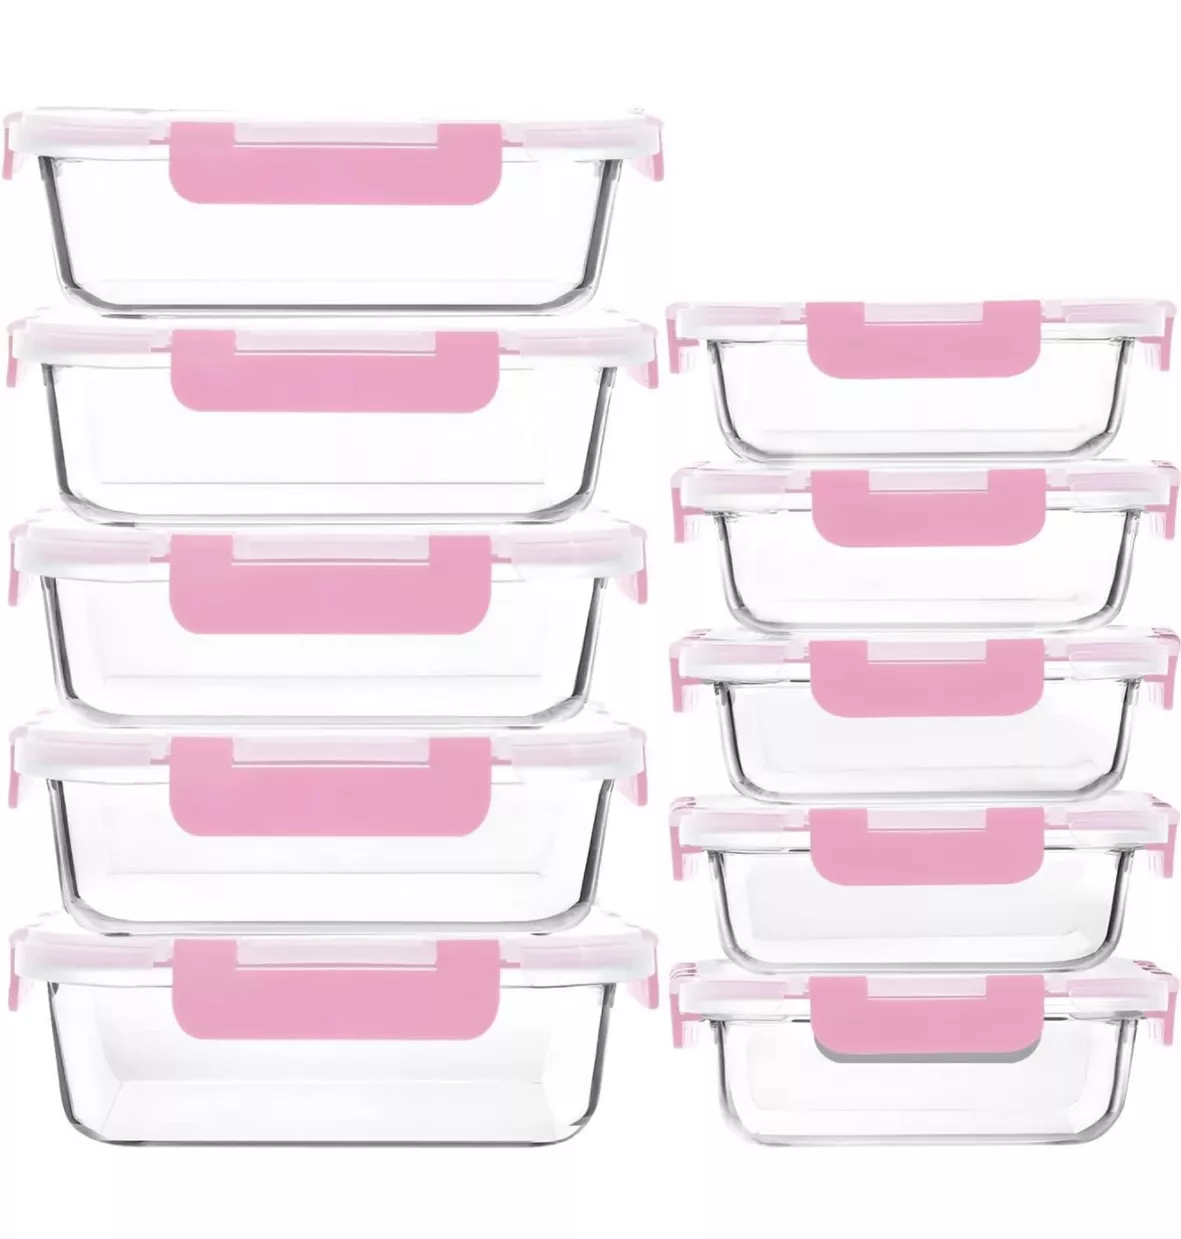 Glass Food Storage Containers with Lids, 24-Piece Glass Meal Prep Containers  Set - Airtight Lunch Containers, Microwave, Oven, Freezer and Dishwasher  Friendly 